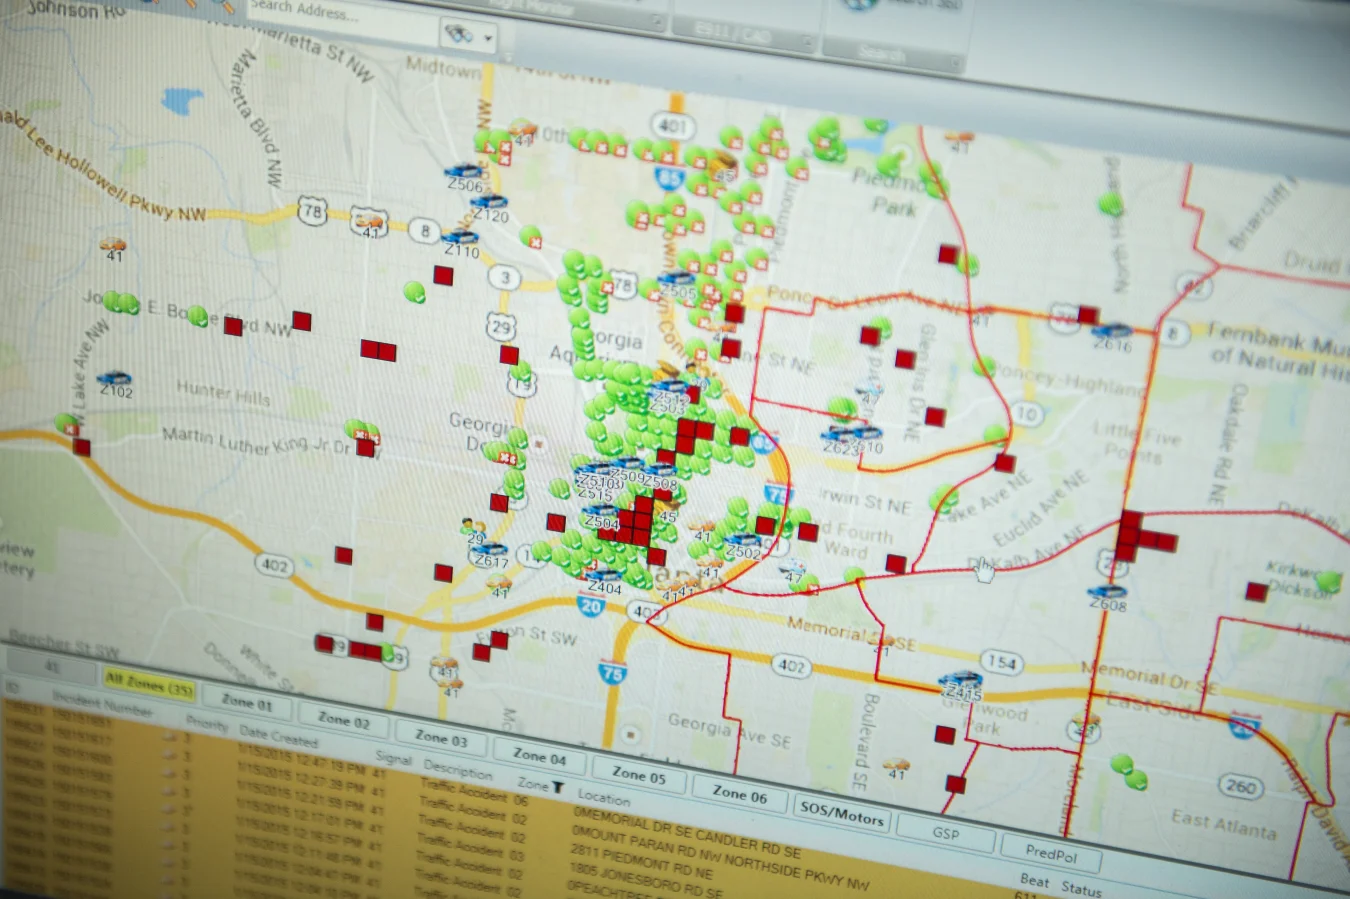 ATLANTA, GA - January 15: The Atlanta Police Department displays a city map through PredPol, a predictive crime algorithm used to map hotspots for potential crime at the Operation Shield Video Integration Center on January 15, 2015 in Atlanta, Georgia. The center is a part of Operation Shield, a joint effort with the Atlanta business community, the Atlanta Police Foundation and The Atlanta Police Department. (Photo by Ann Hermes/The Christian Science Monitor via Getty Images)